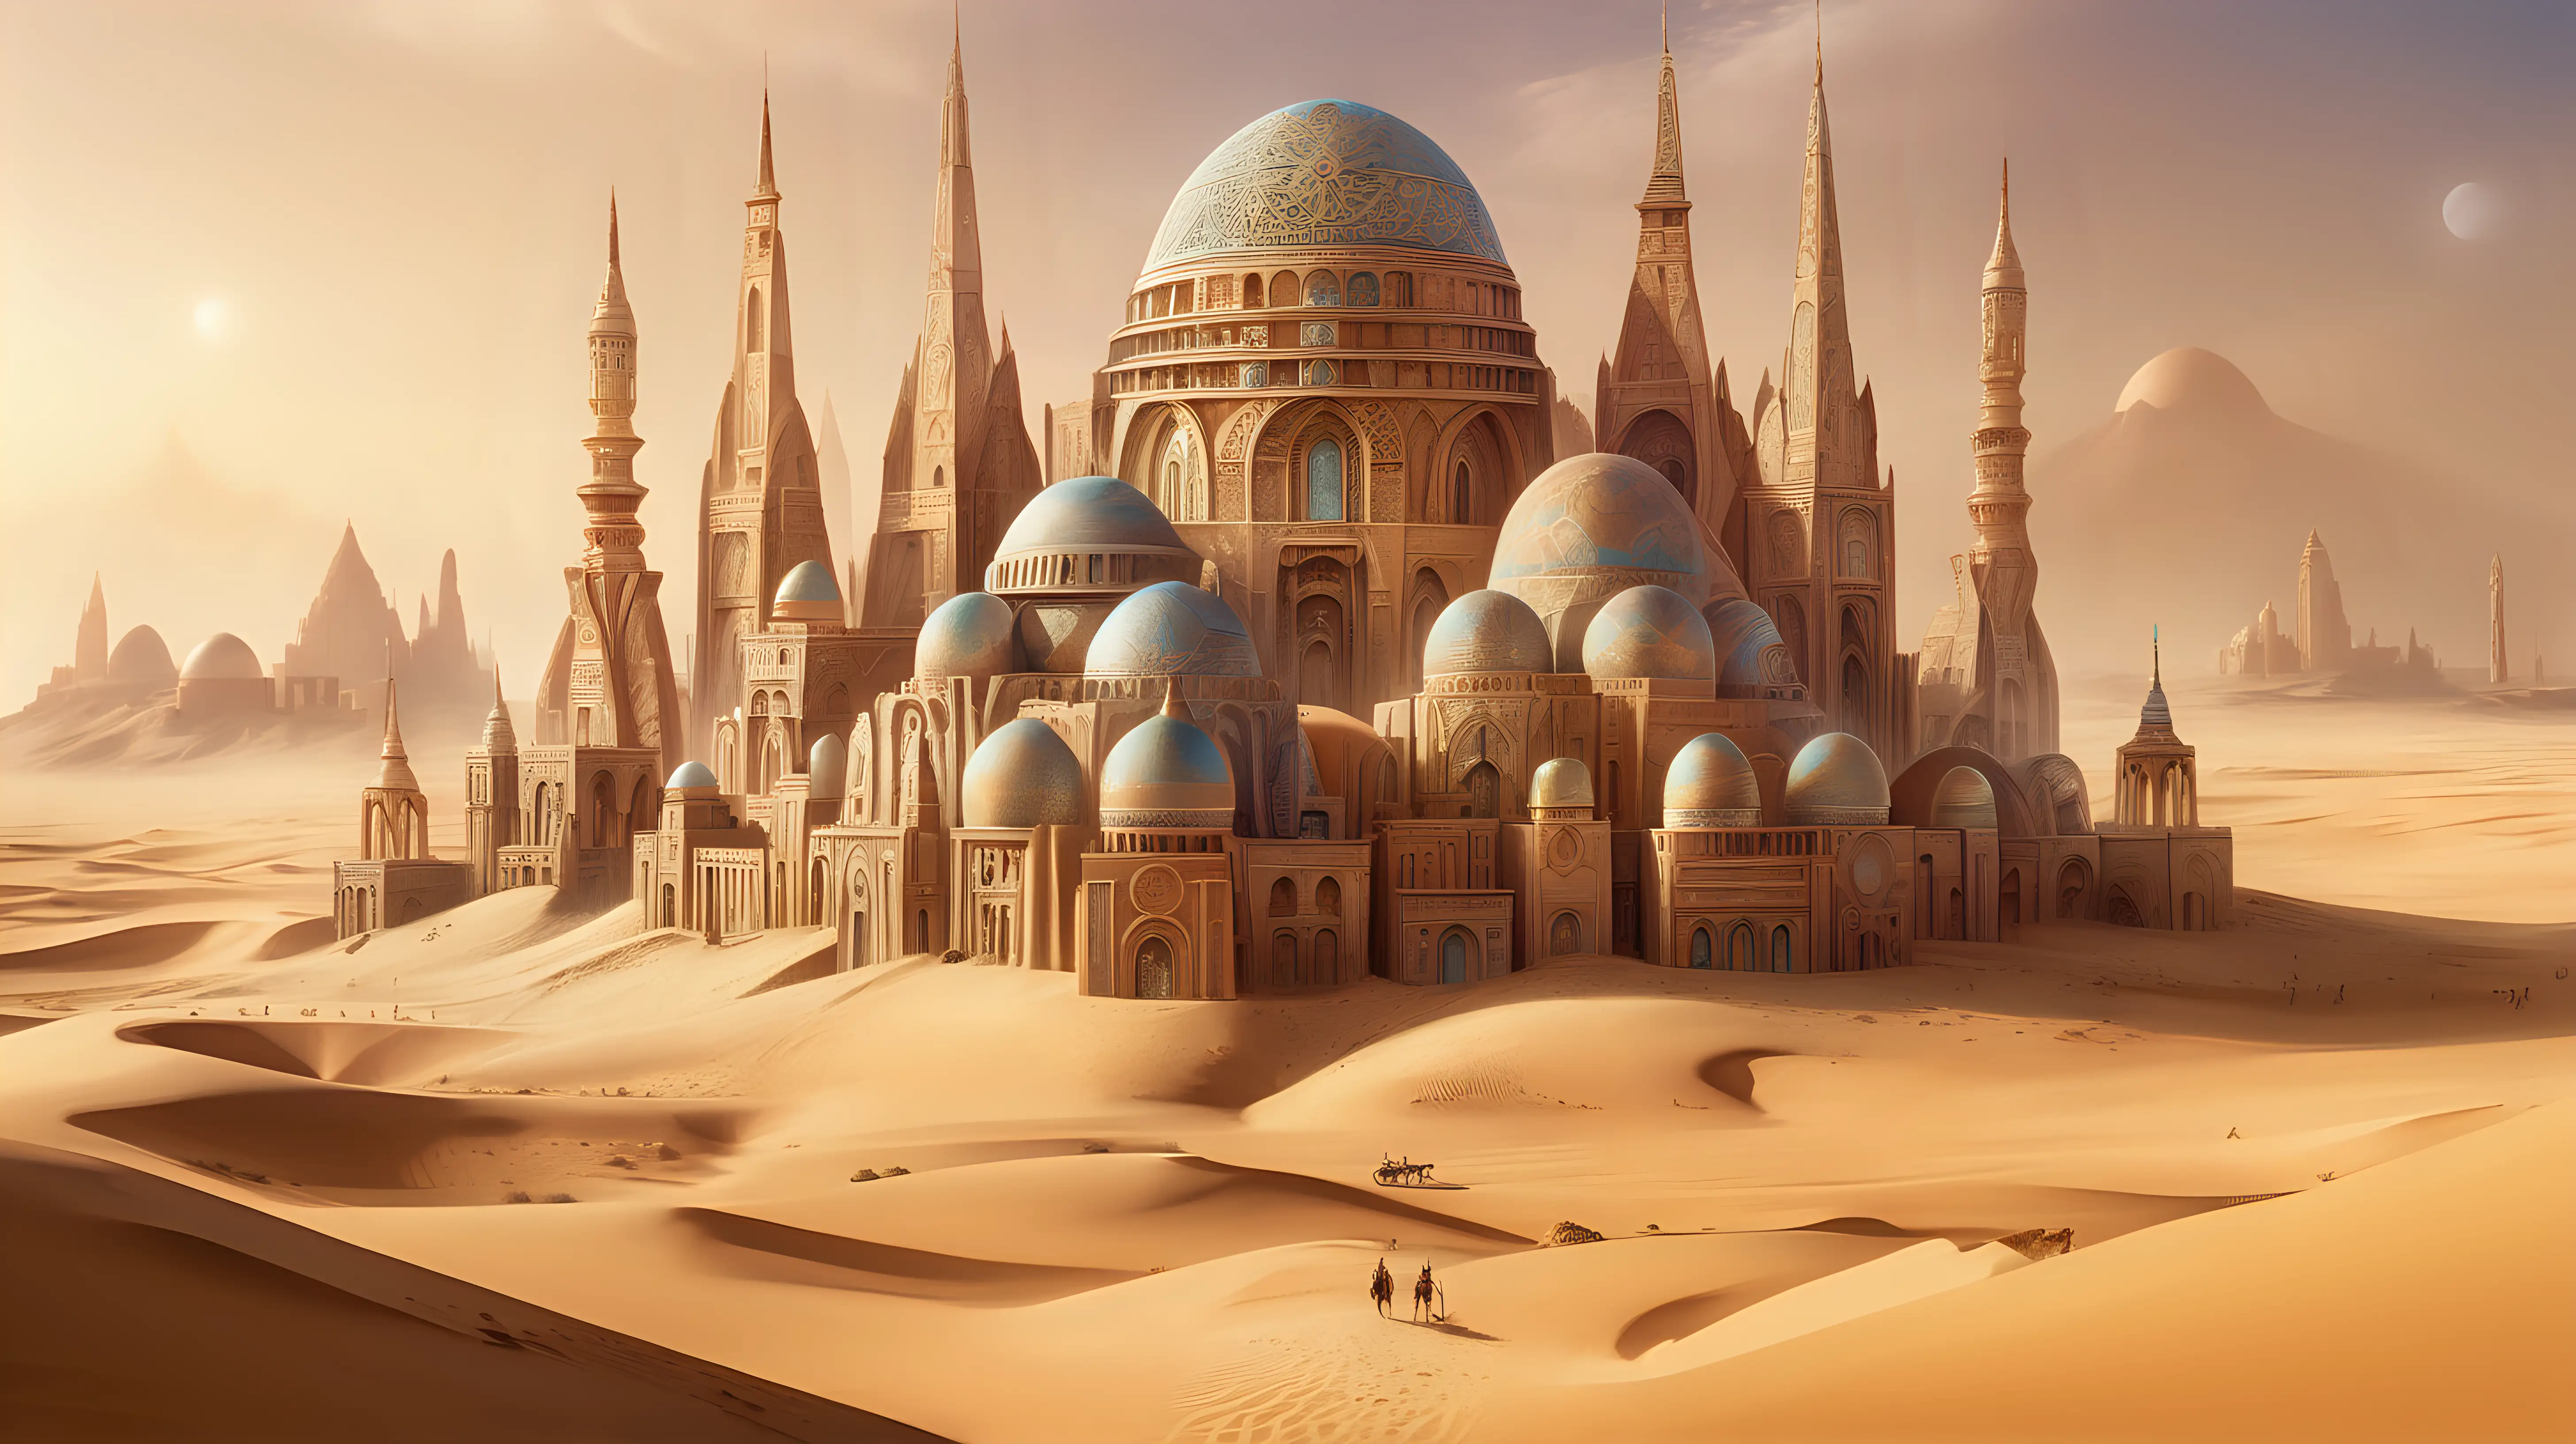 A mirage of an ancient city rising from the sands, its spires and domes adorned with intricate patterns that seem to shimmer and shift in the desert heat, creating a psychedelic vision of a lost civilization.